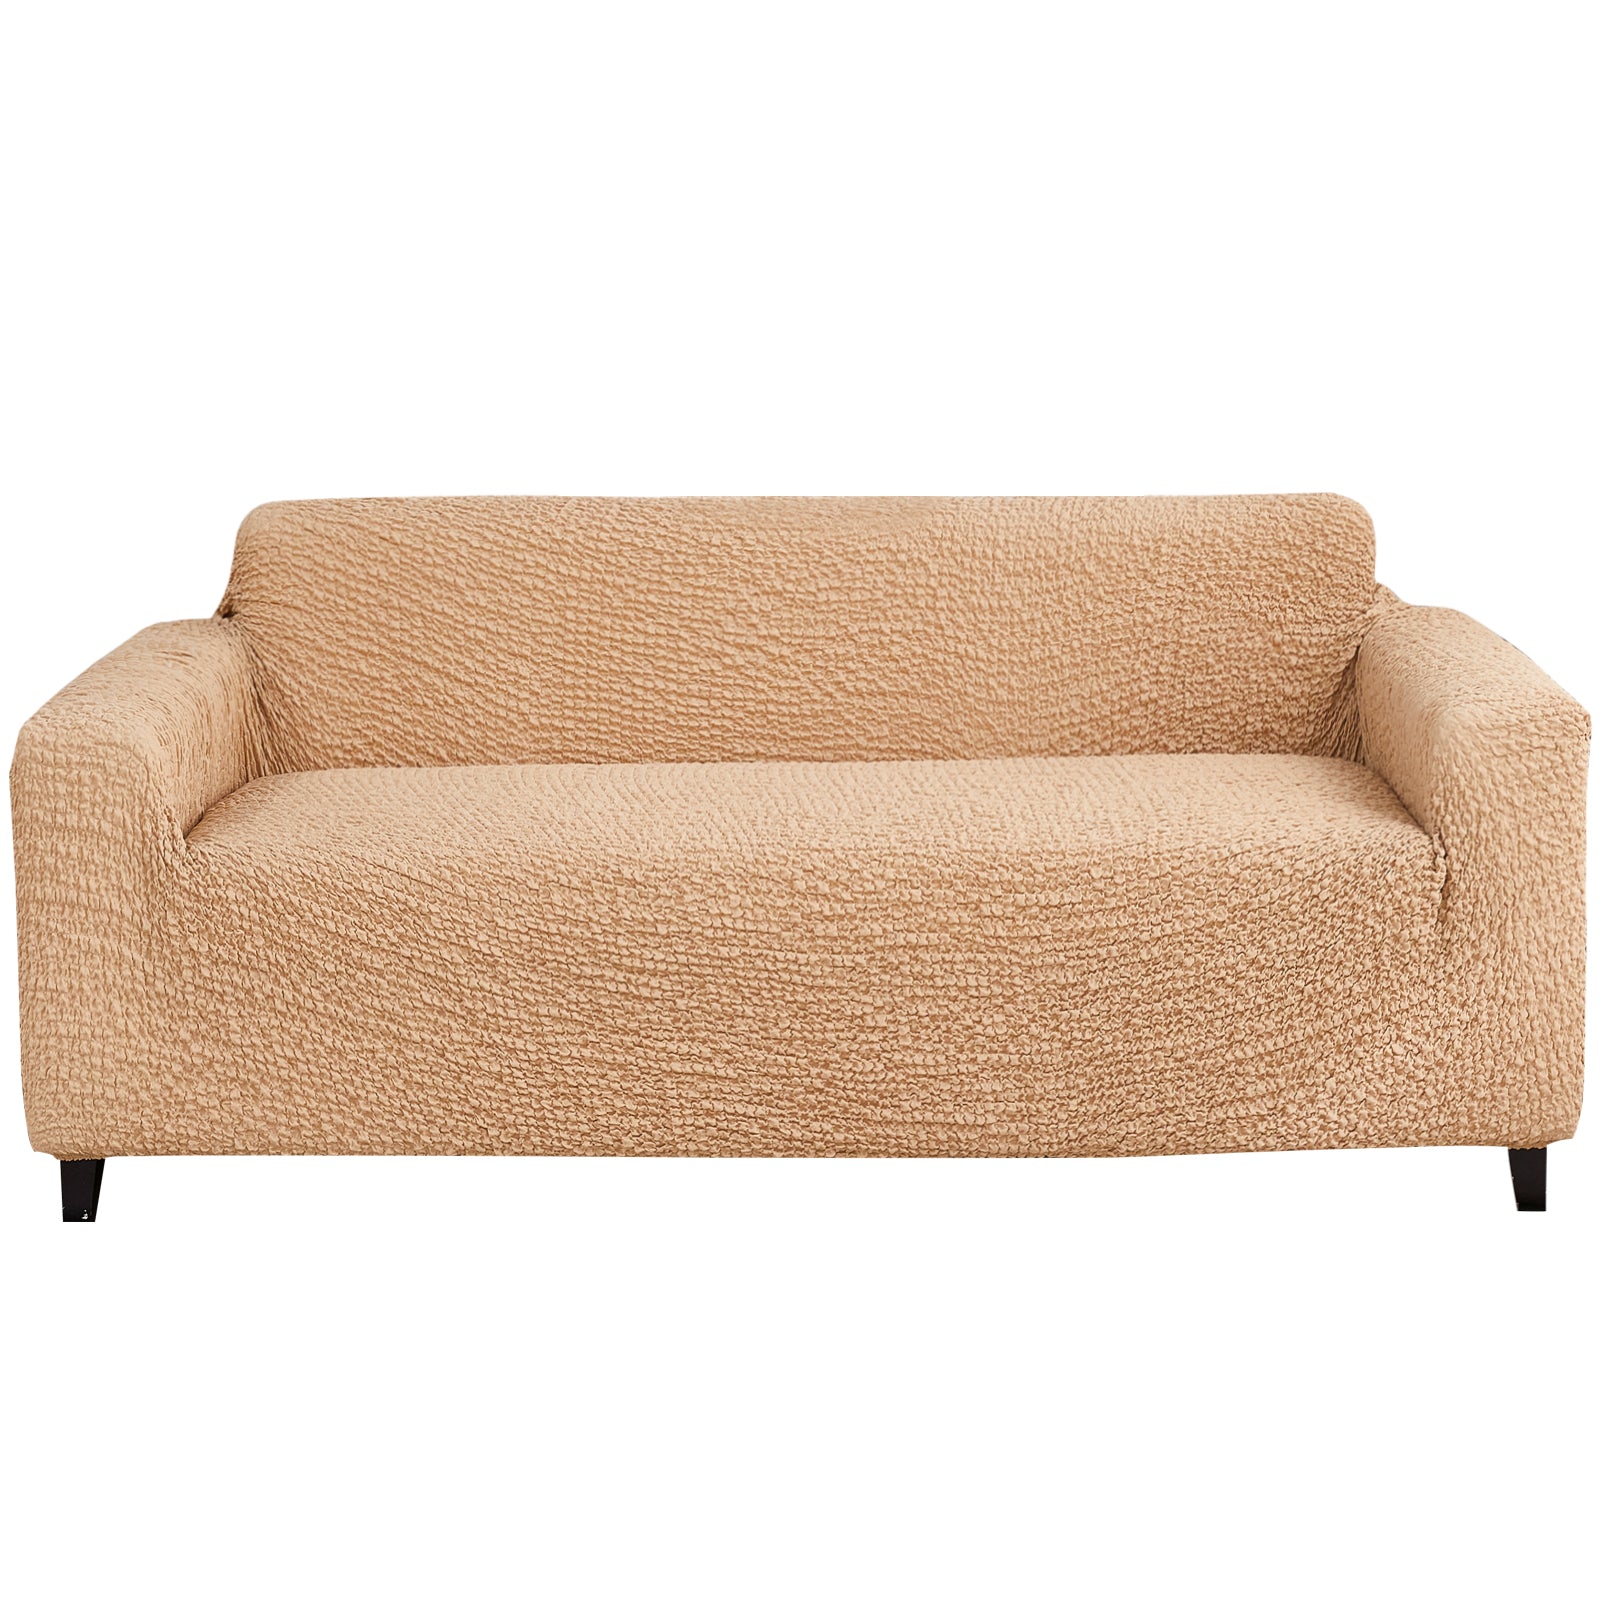 Stretch Sofa Cover, Jacquard 3D Collection stretch sofa cover, one-piece form-fitting washable slipcover